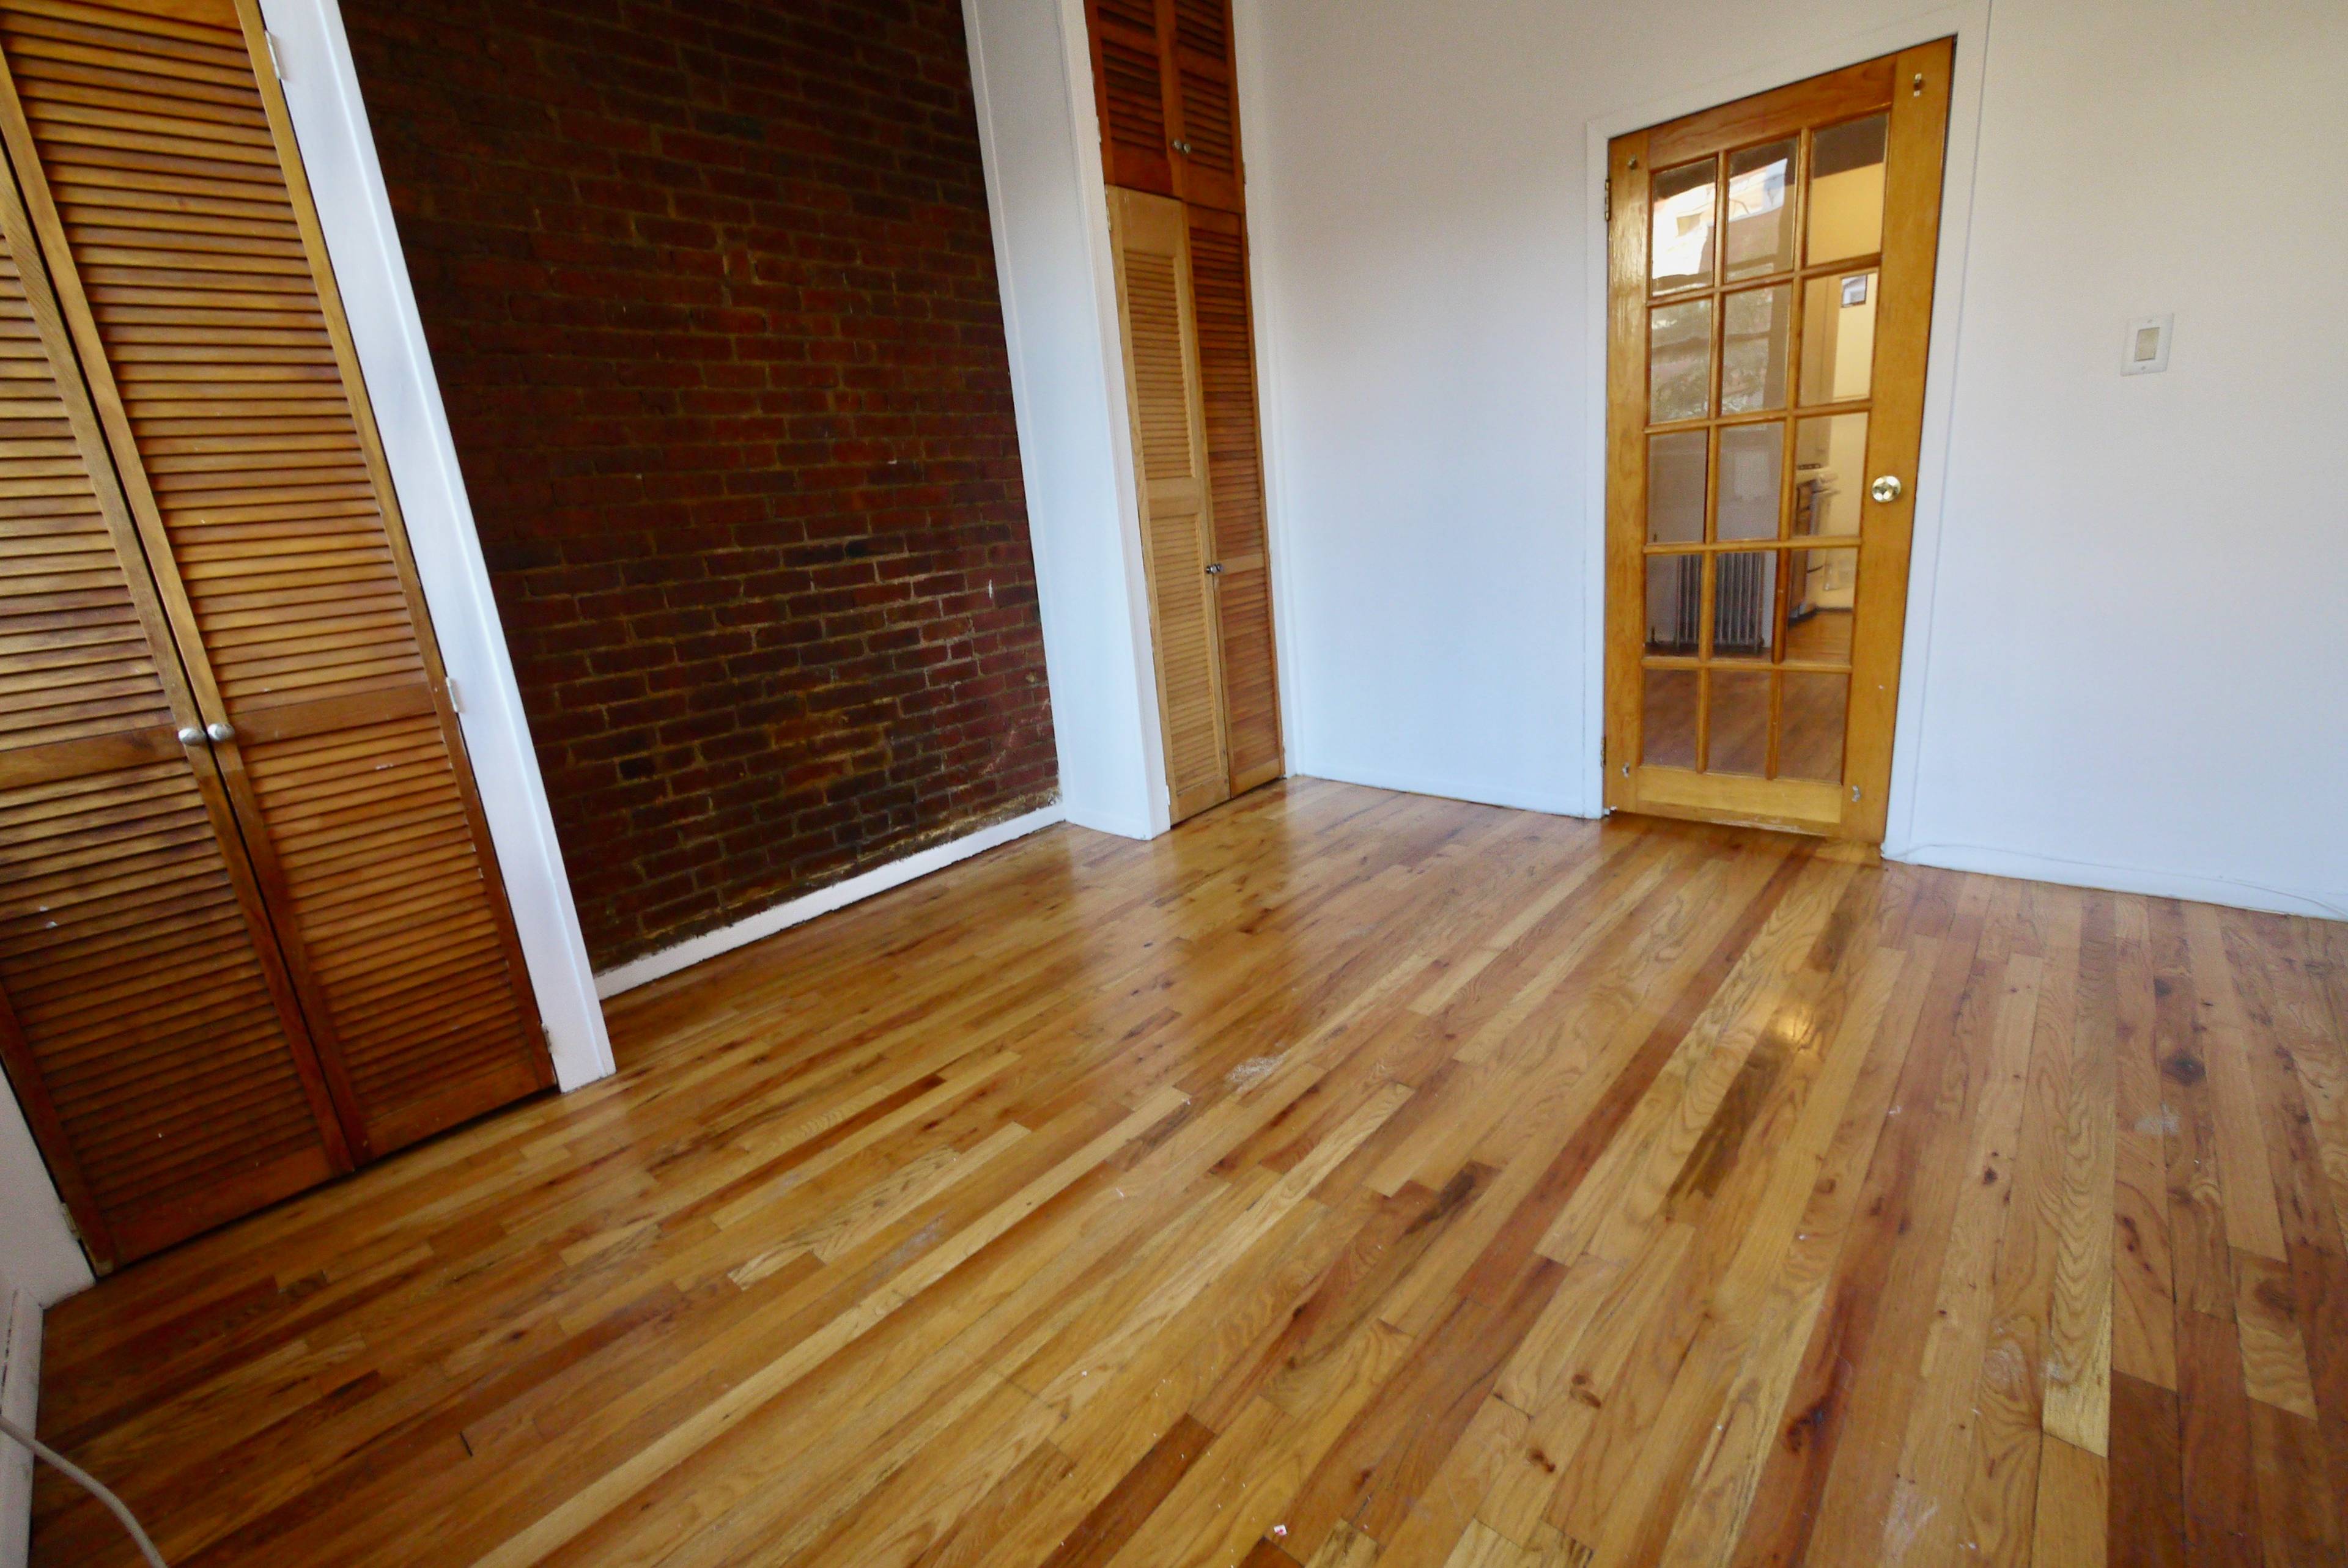 Available for an immediate occupancy is this best value one bedroom with sleep storage loft.